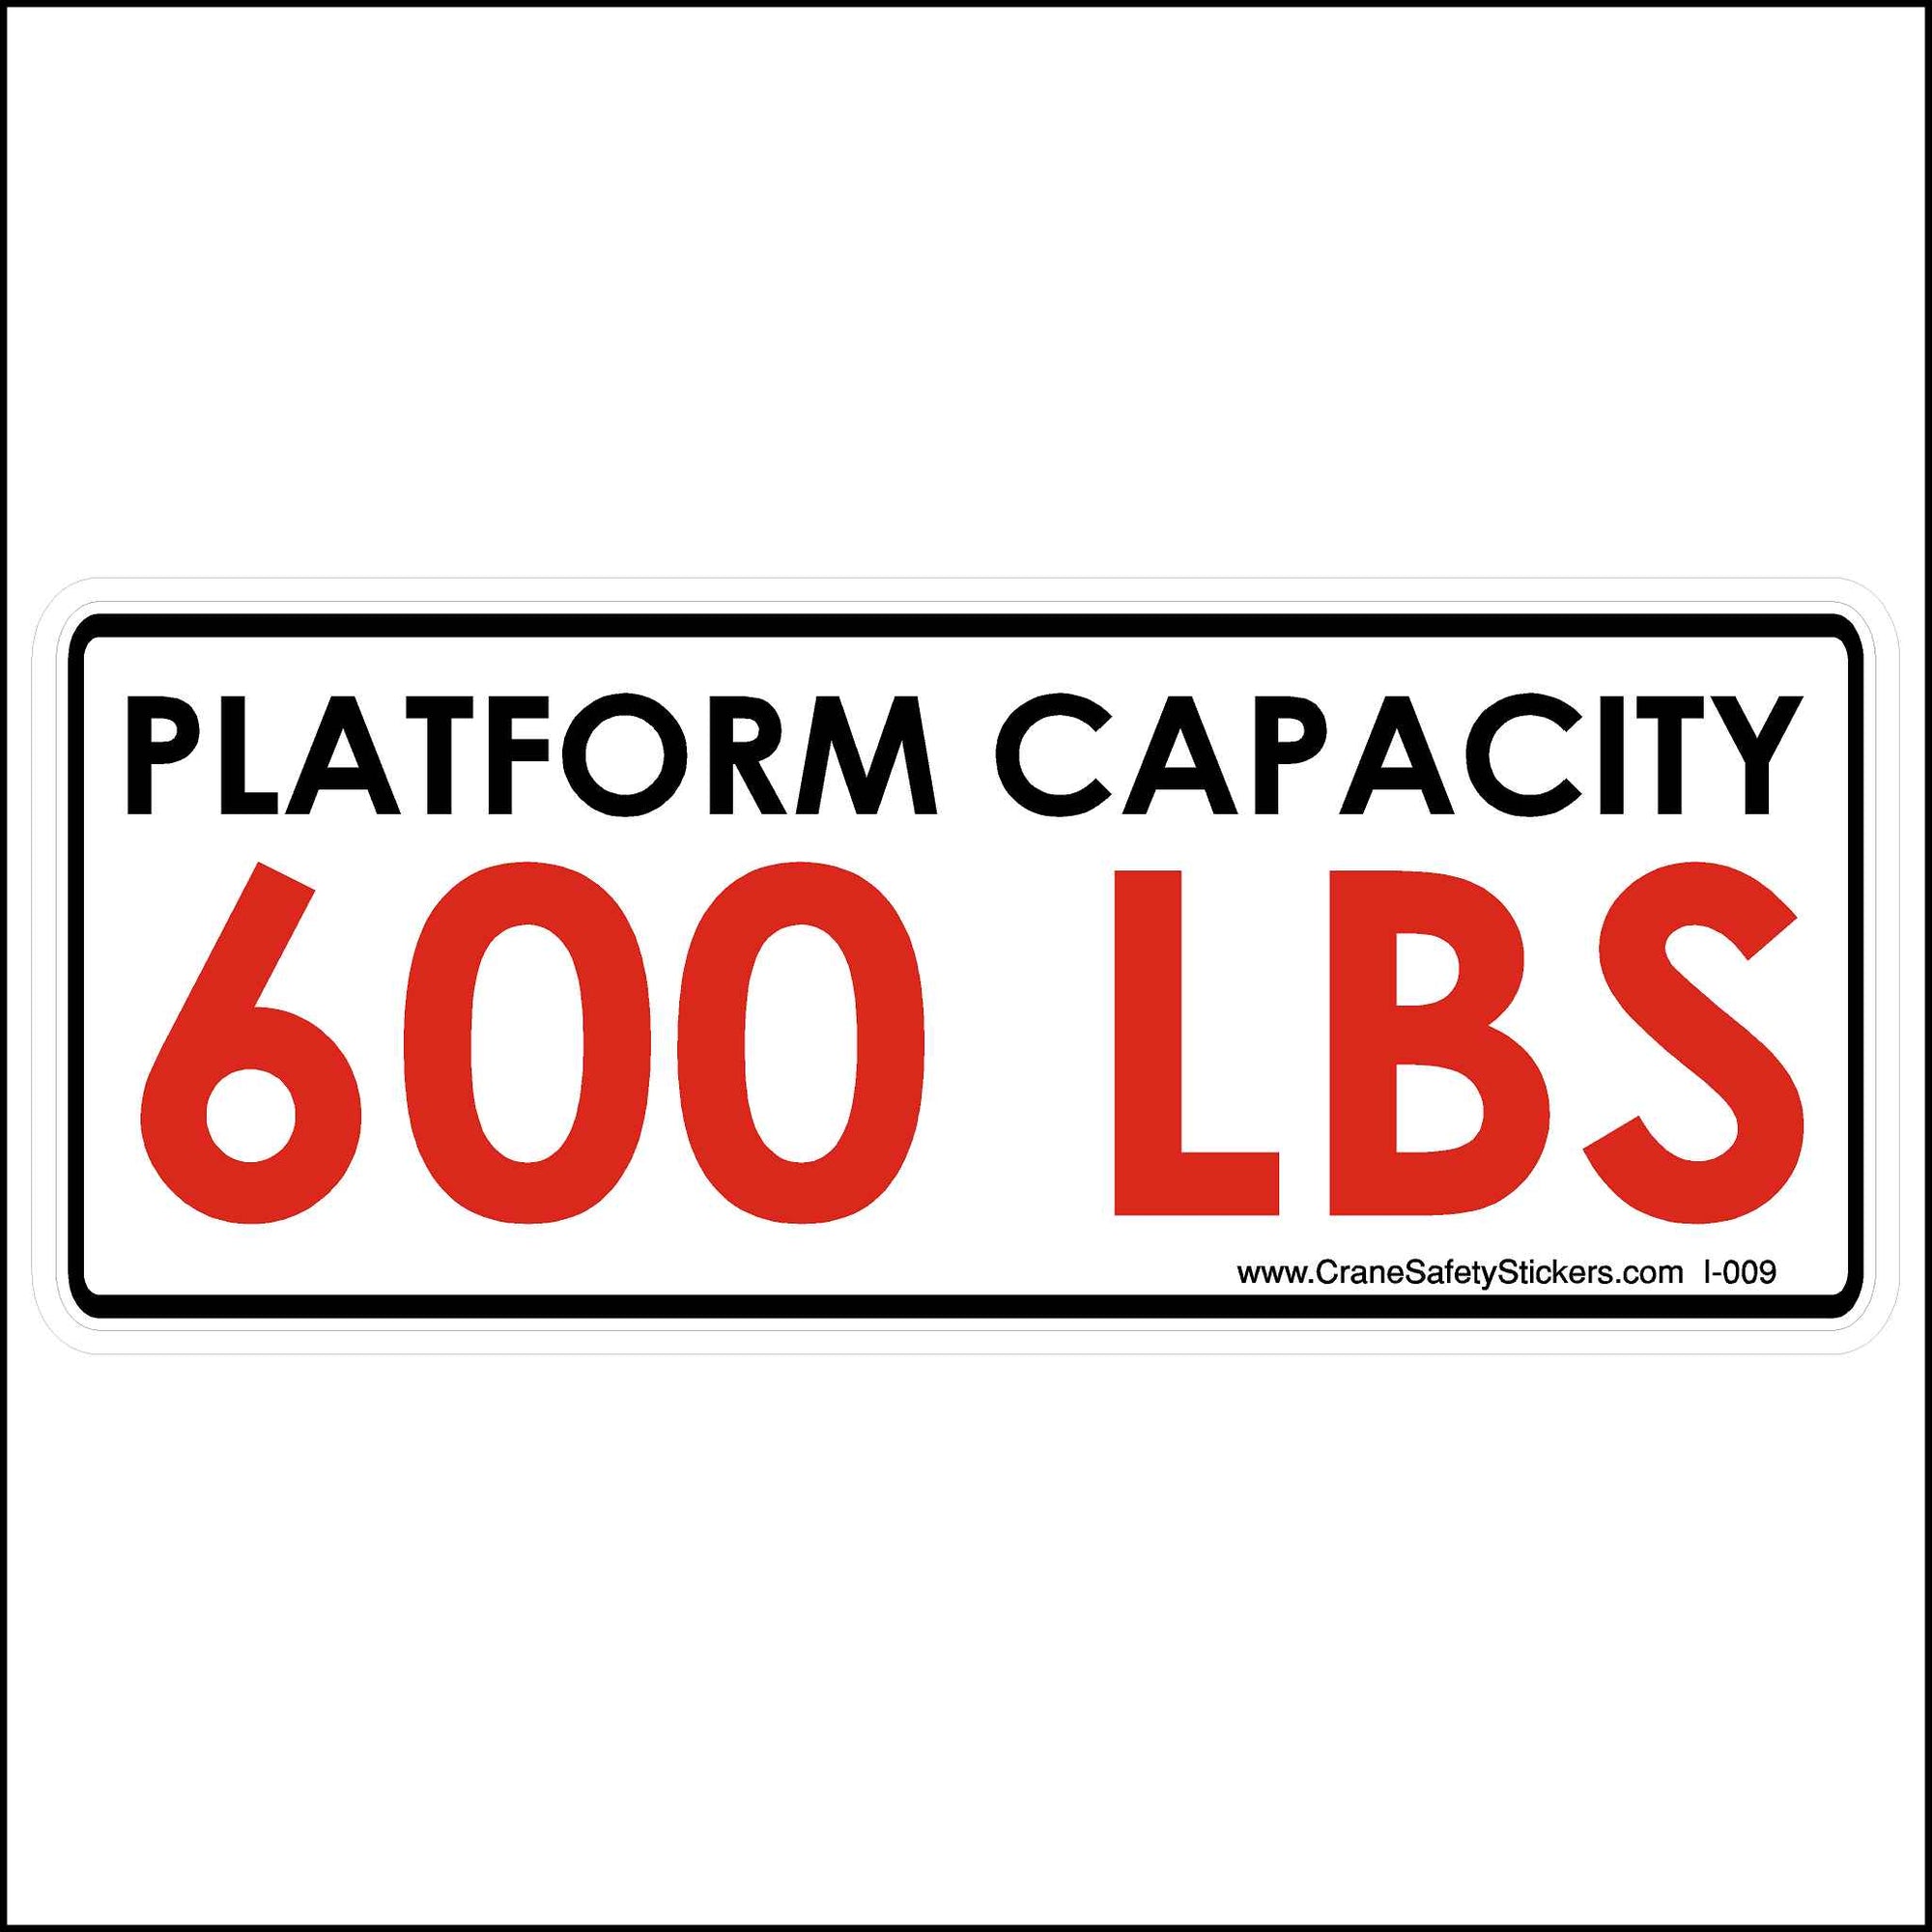 Platform Capacity 600 Lbs Sticker. Platform Capacity Printed in black, 600 LBS printed in red both on a white background.